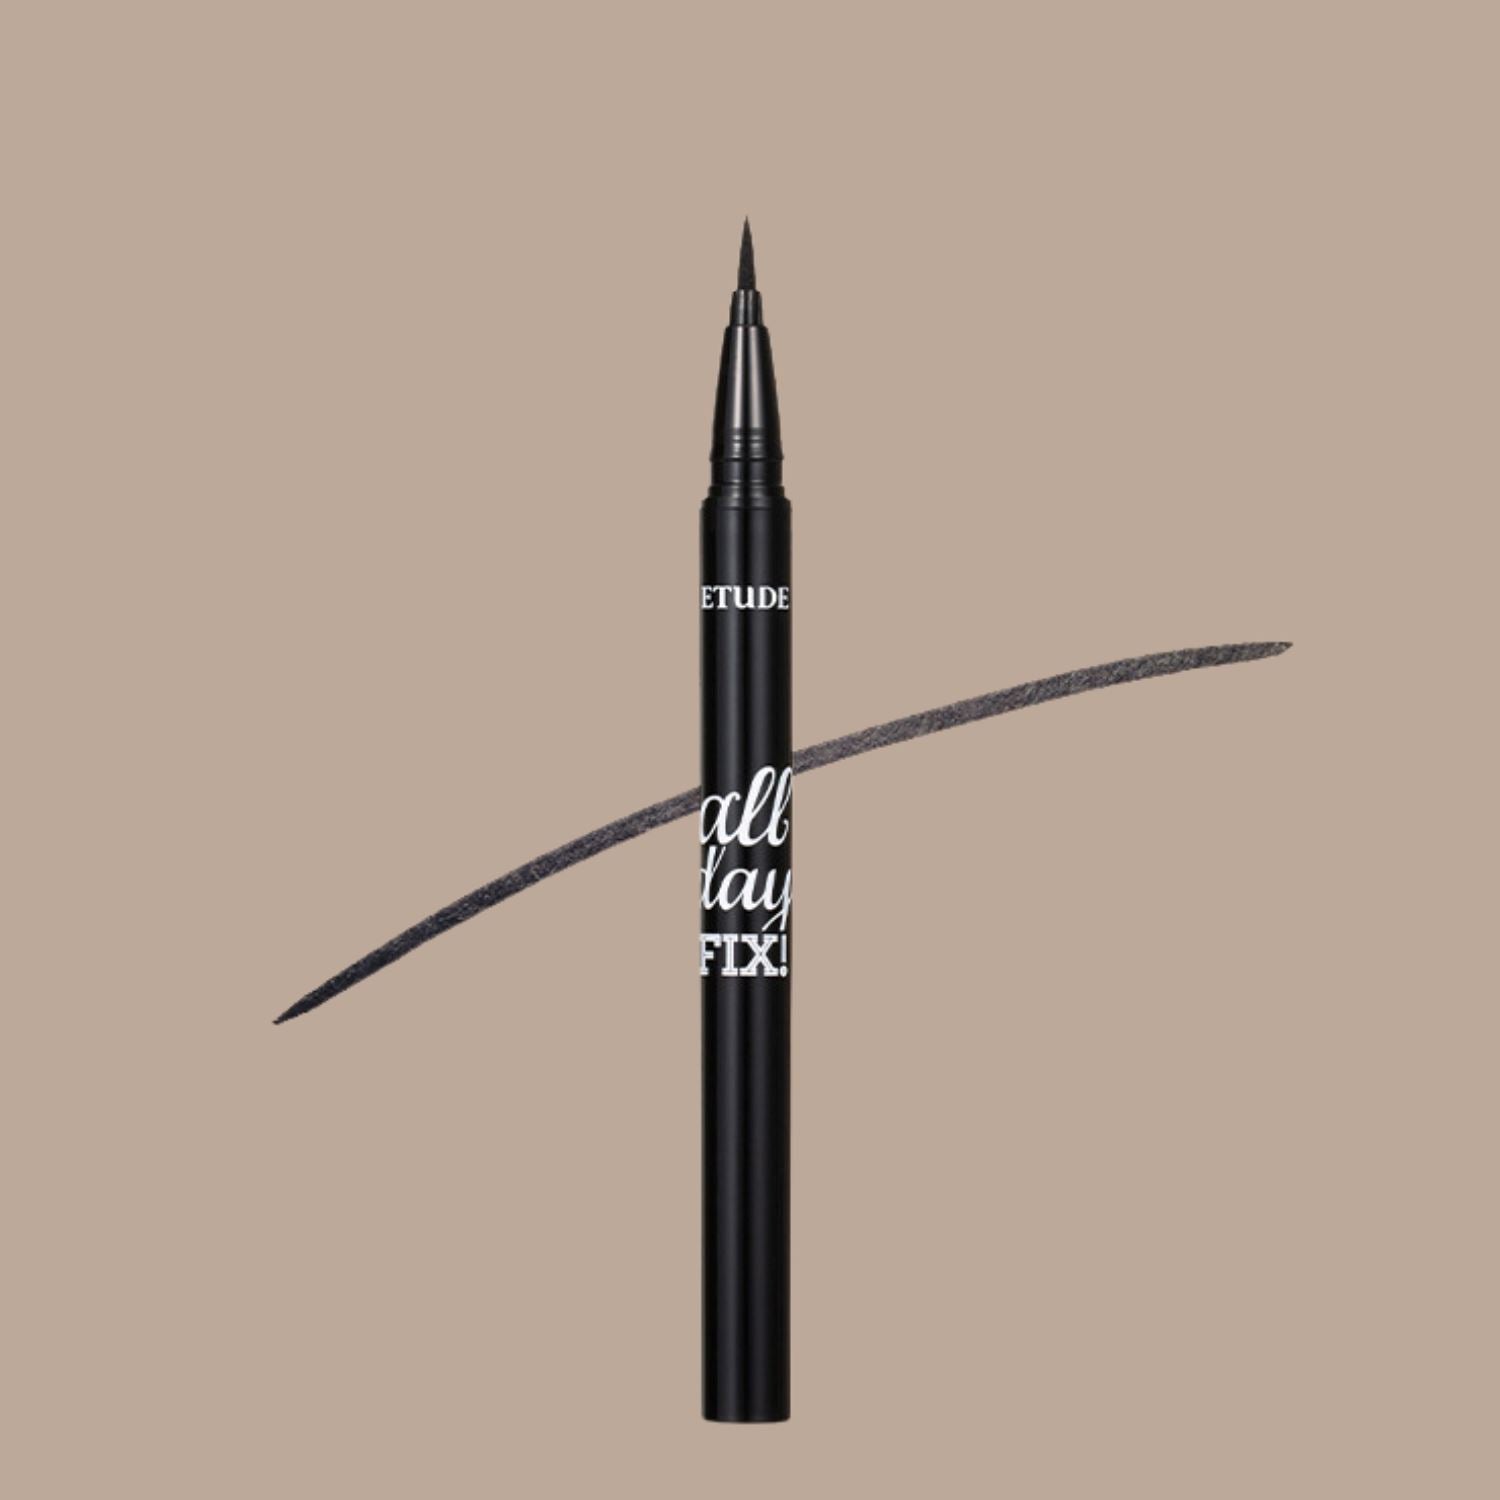 Etude All Day Fix Pen Liner 